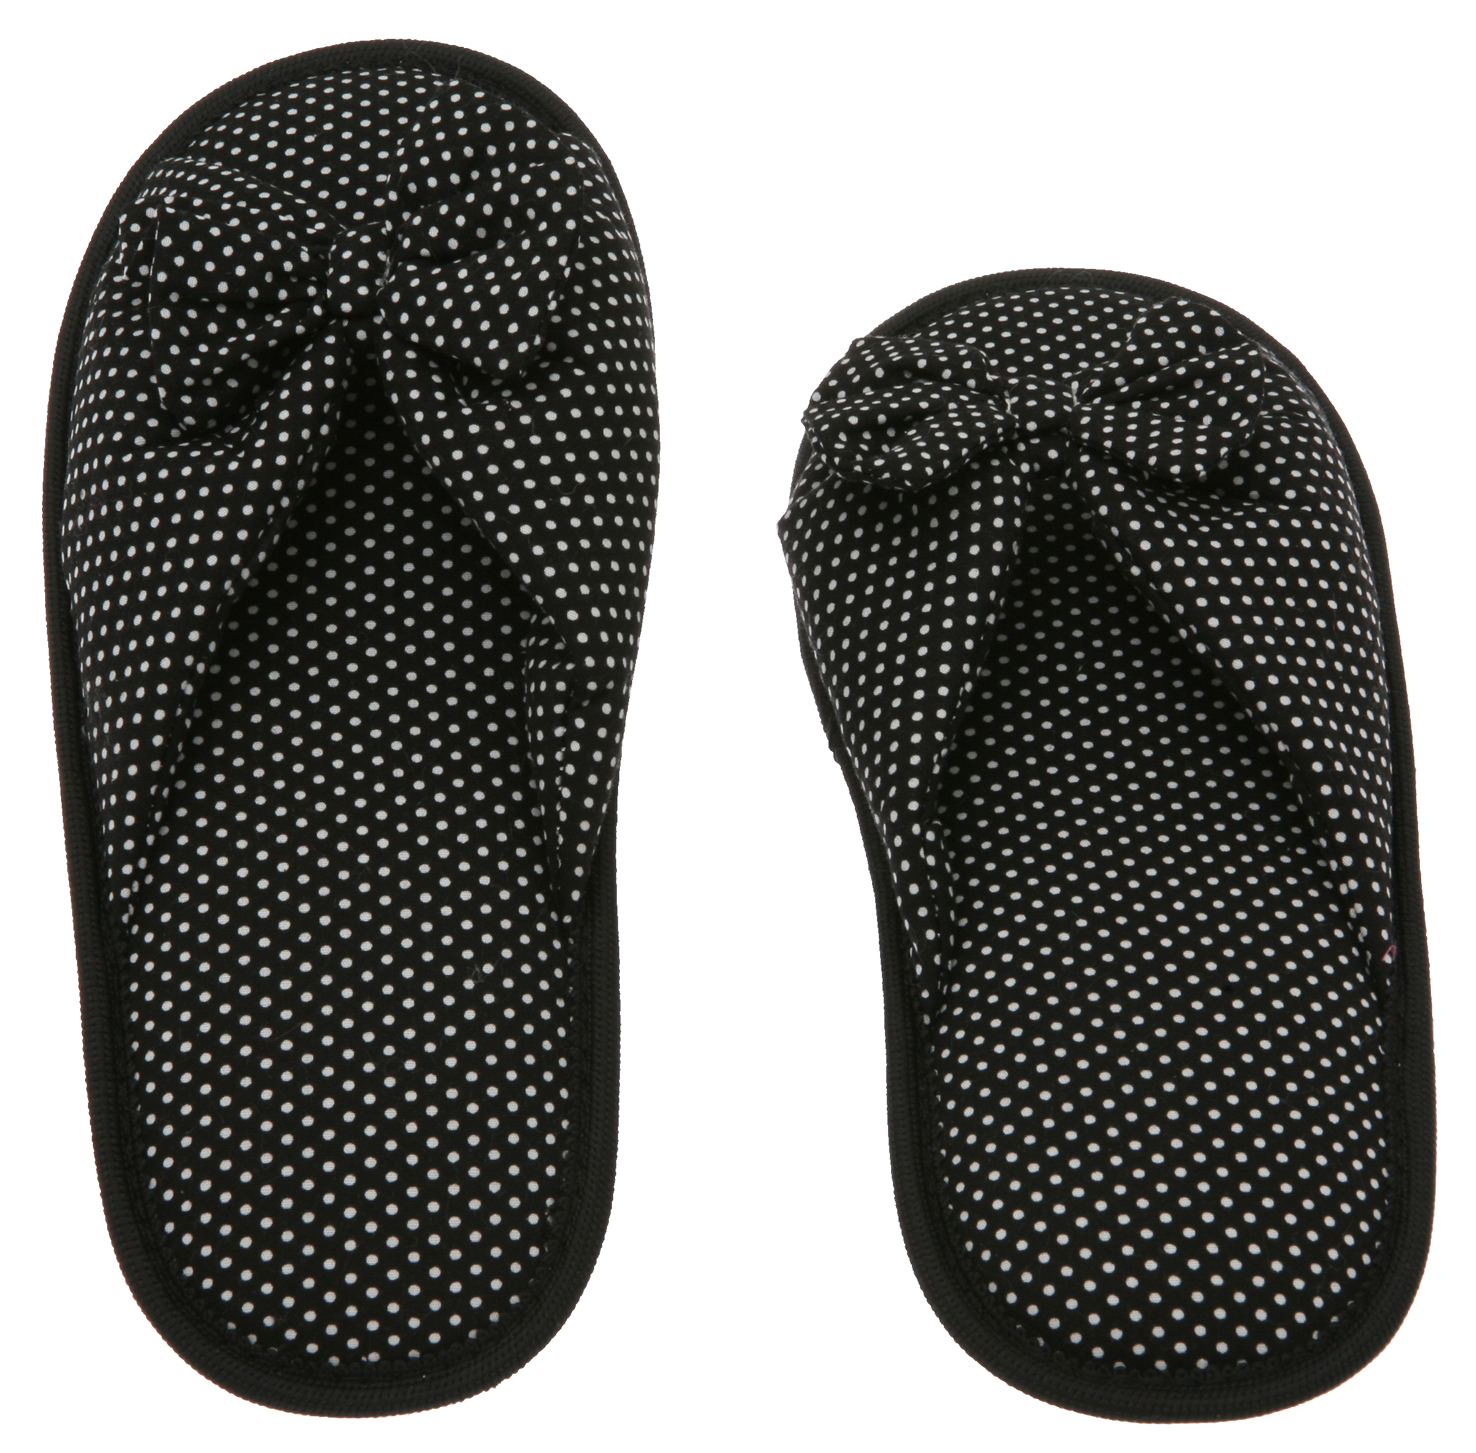 Living Healthy Products Cotton Poka Dot Womens Open Toe Flip-Flops, Size 7-8  - Soft Cute Classic Butterfly Bow Slippers - Black